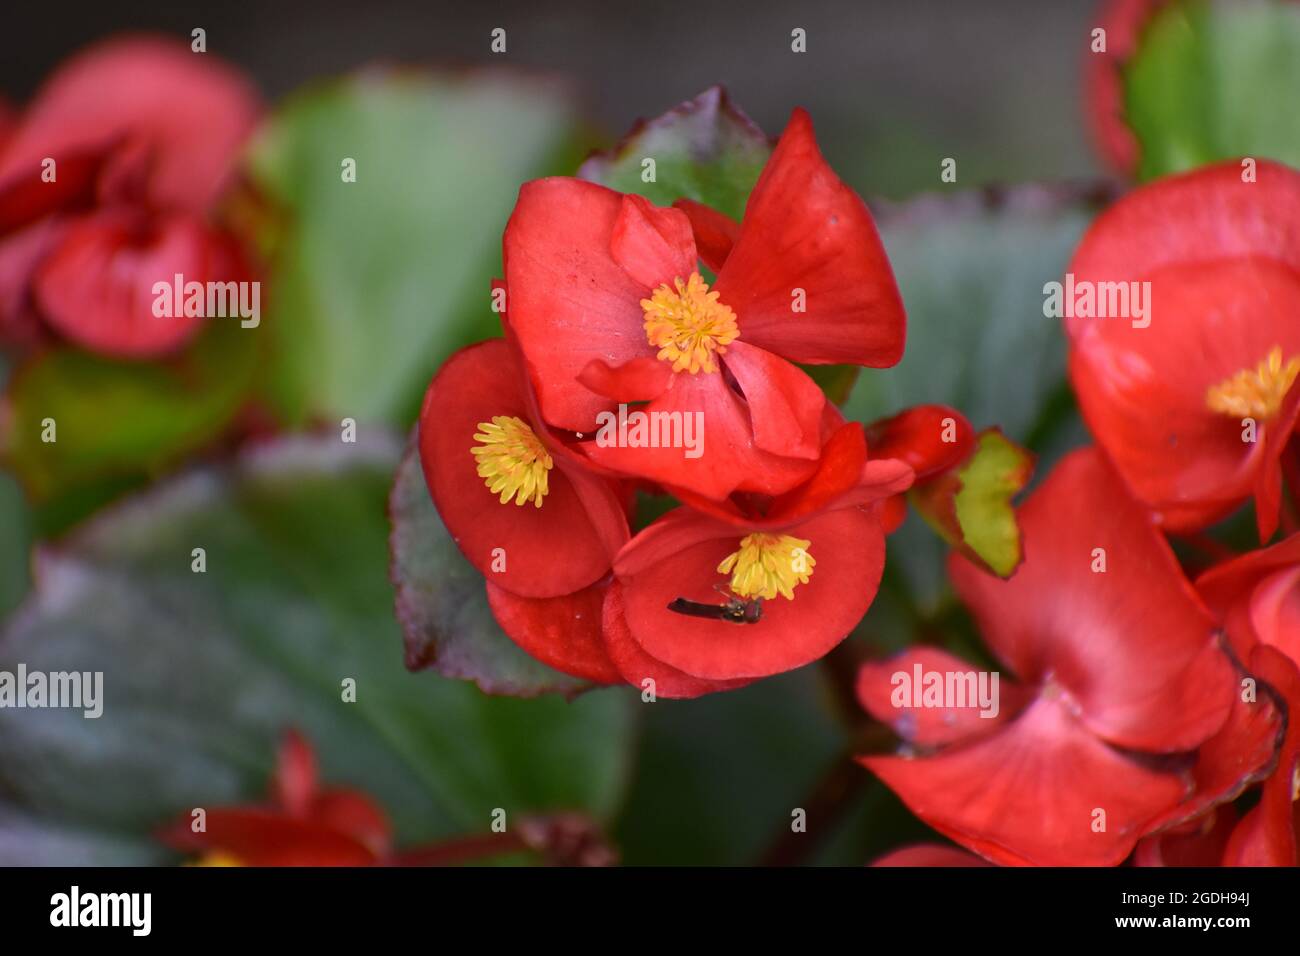 Red Begonia flowers Stock Photo